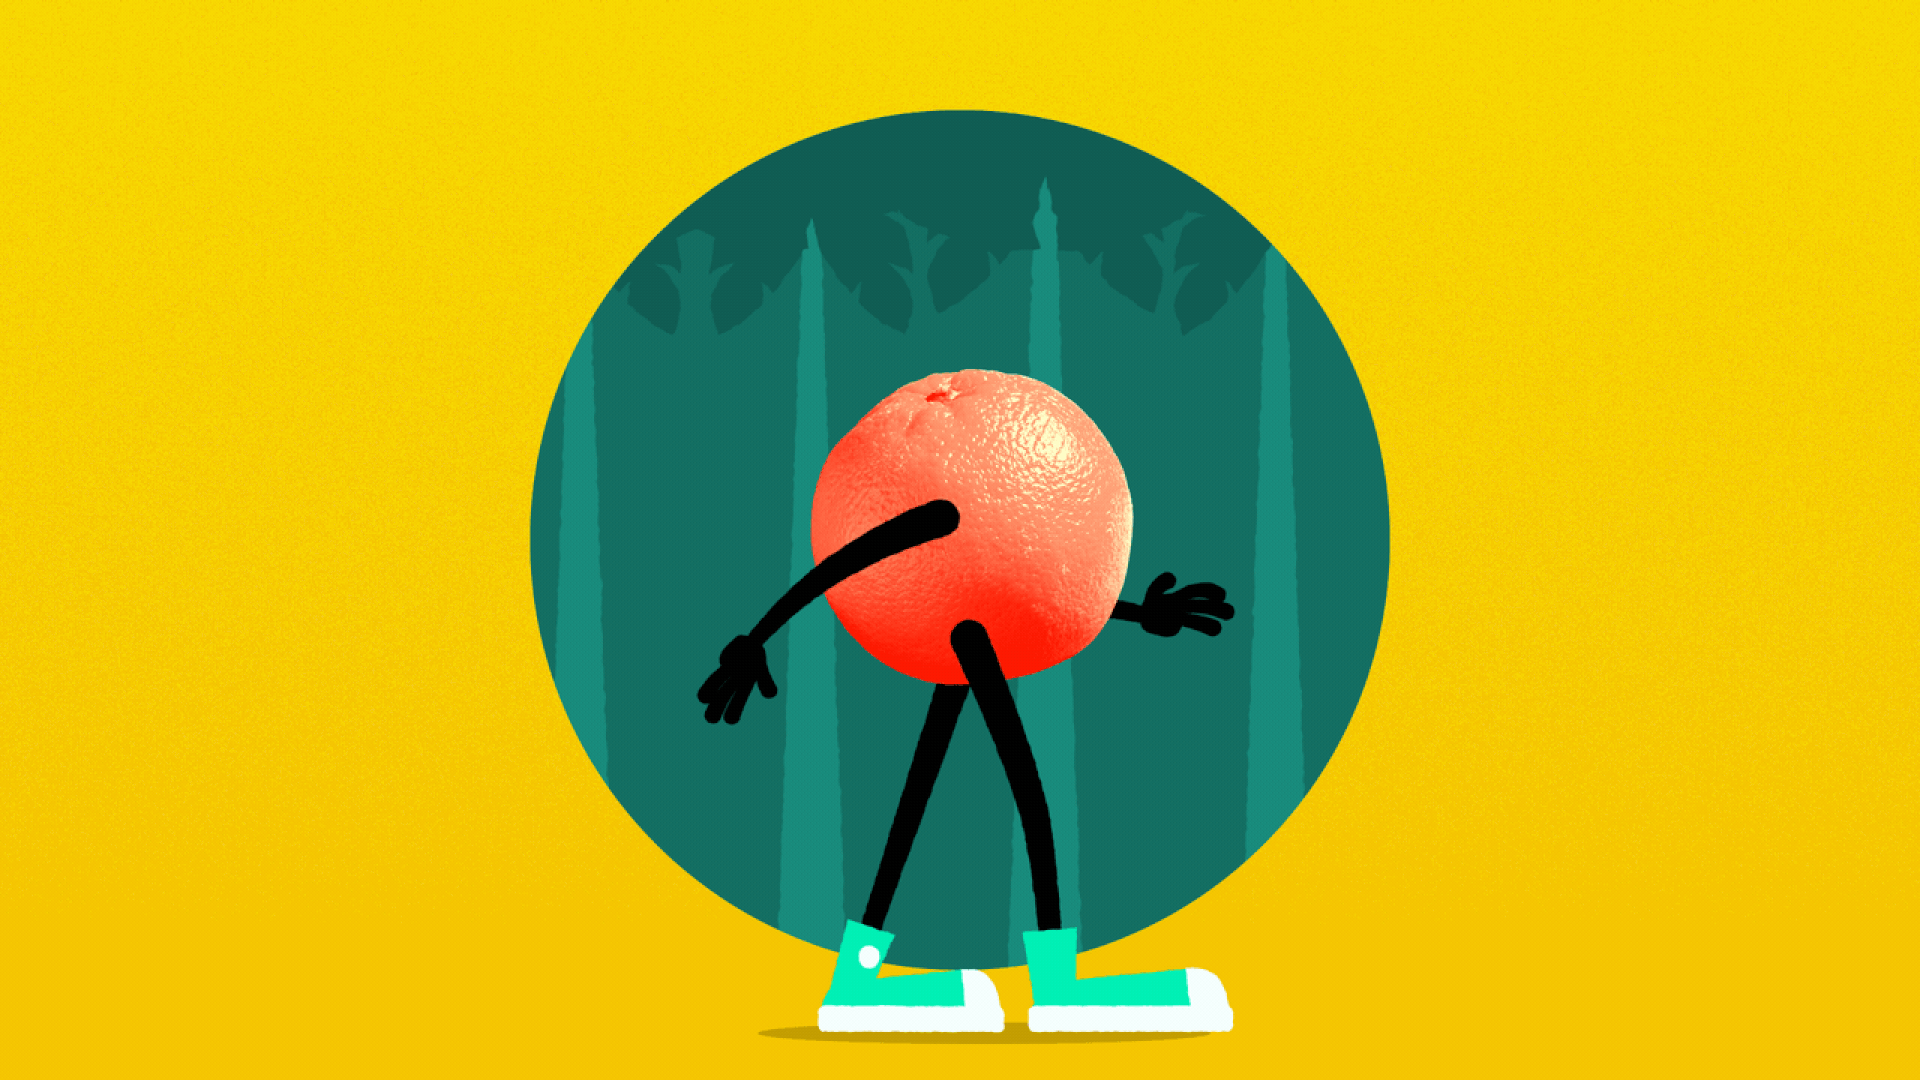 Illustration of an orange with arms and legs, walking.